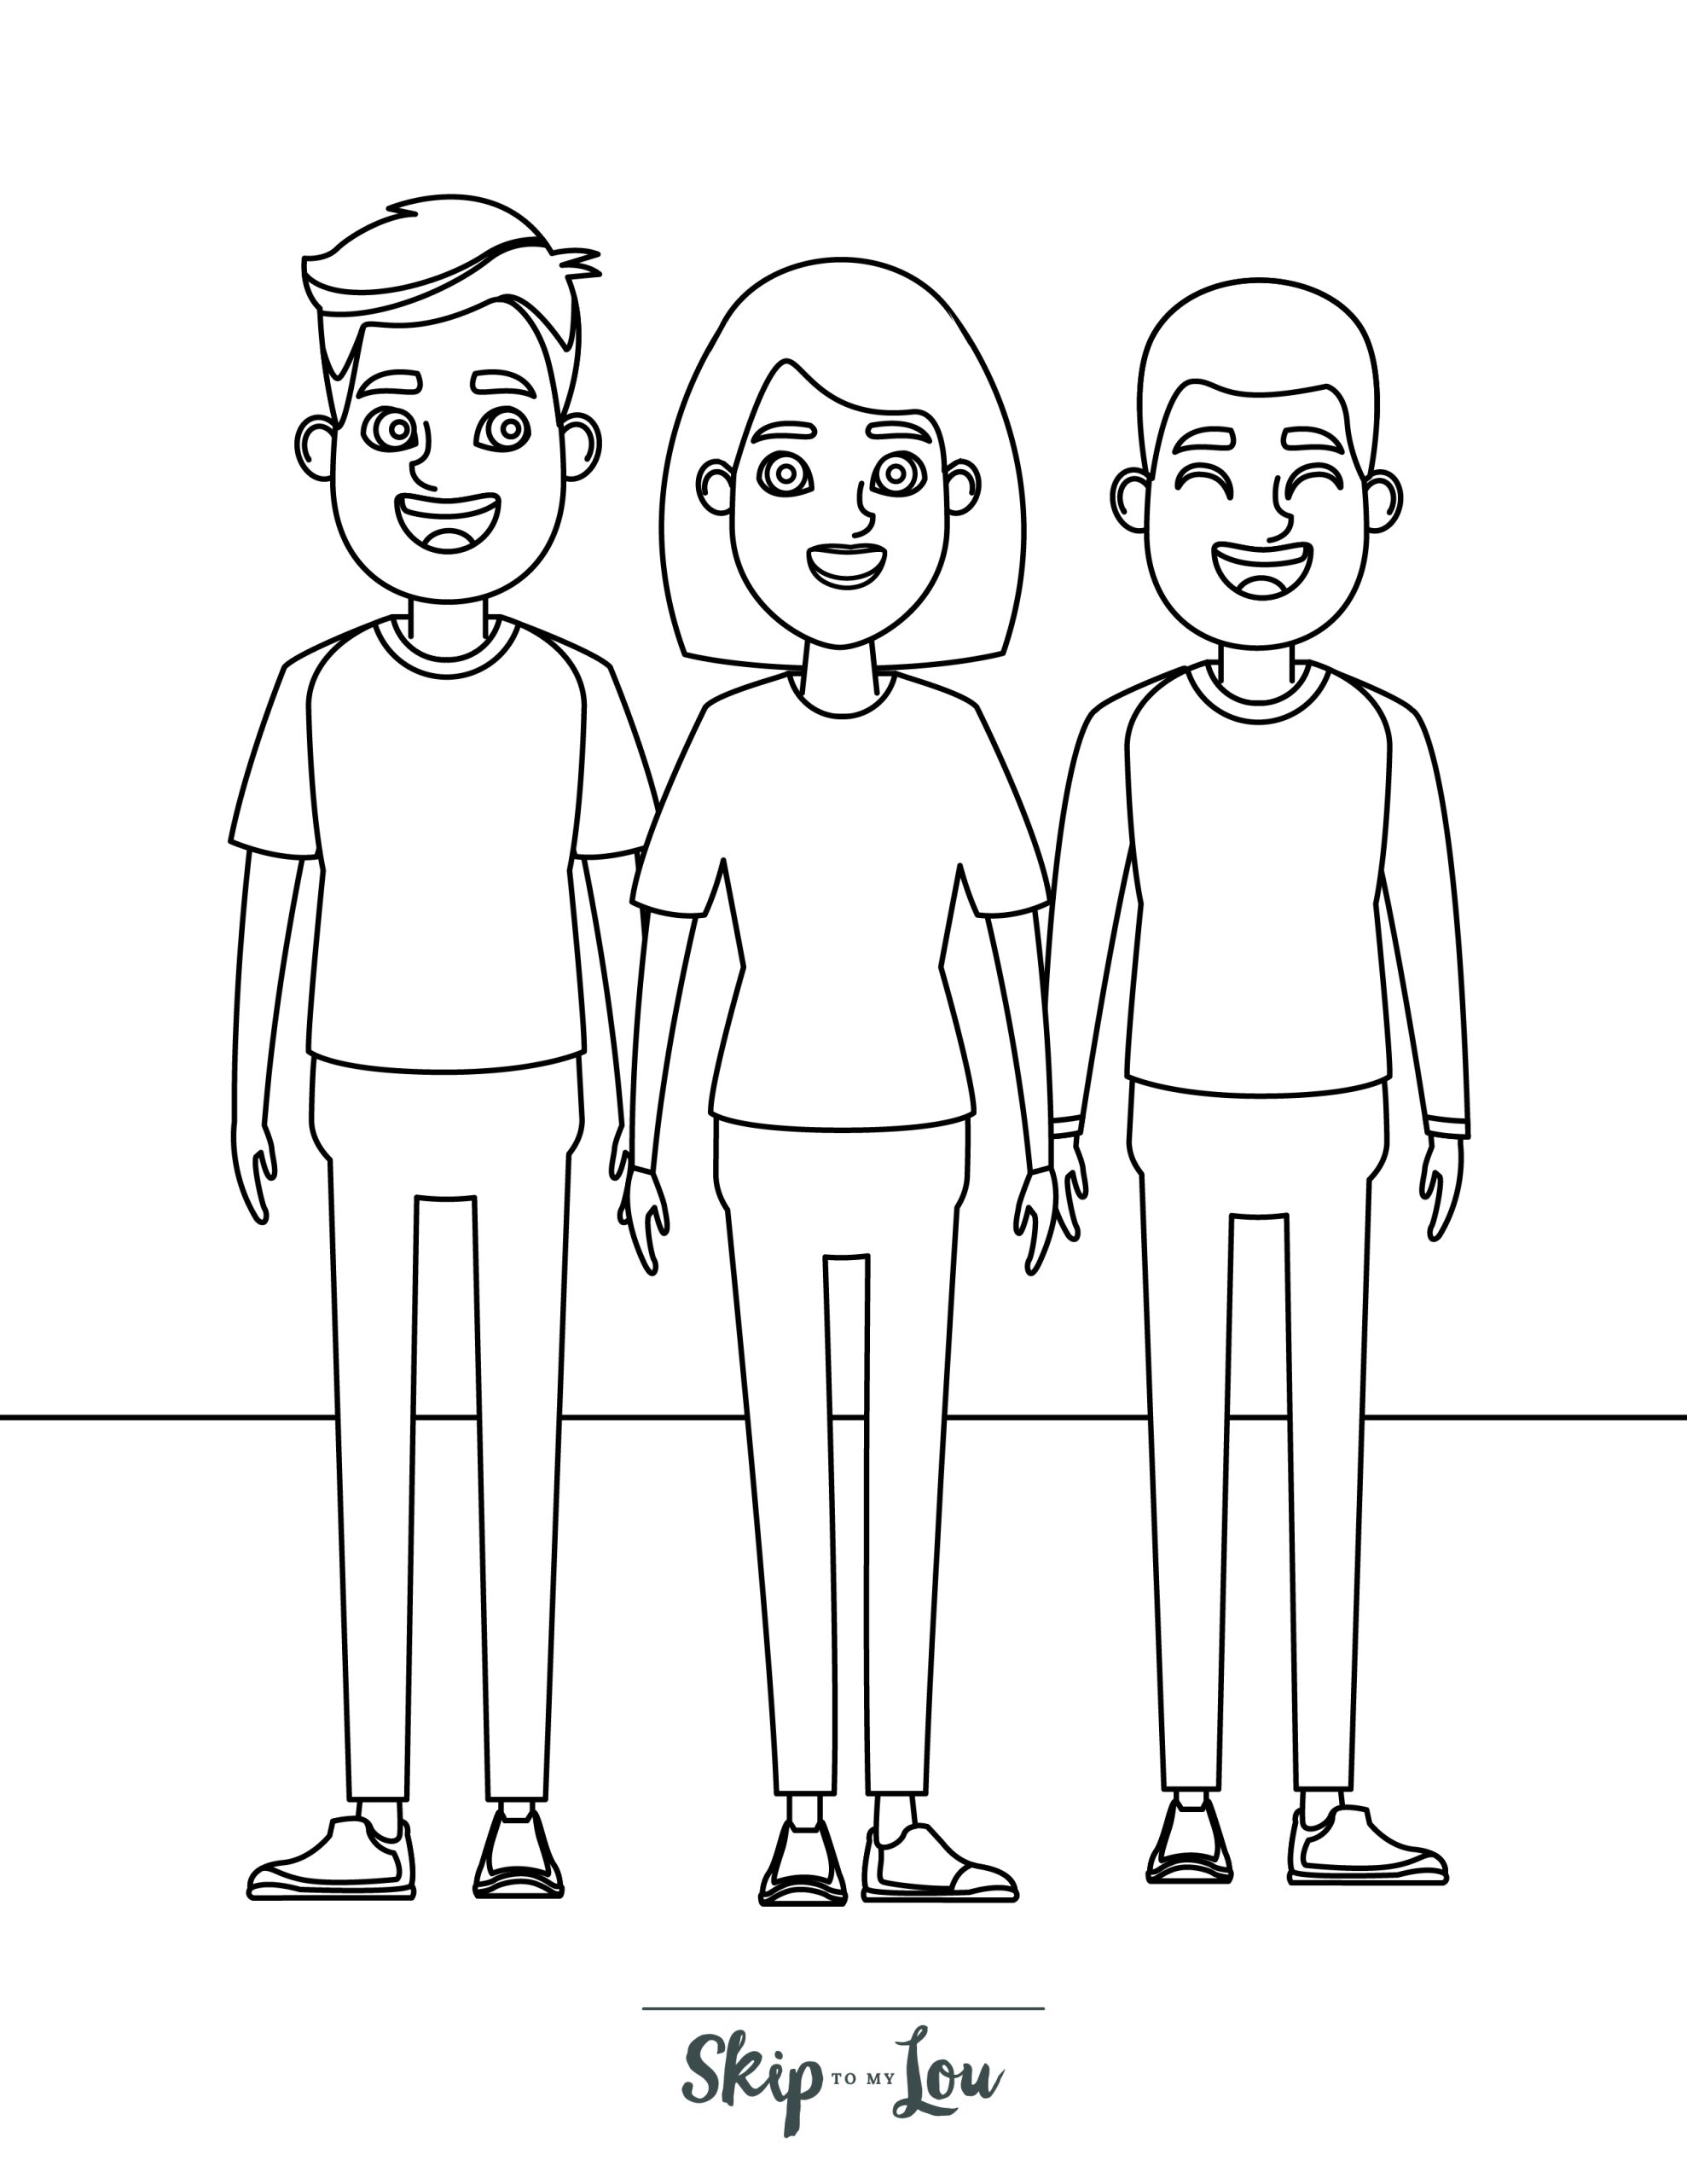 People Coloring Page 1 - Line drawing of a family standing together